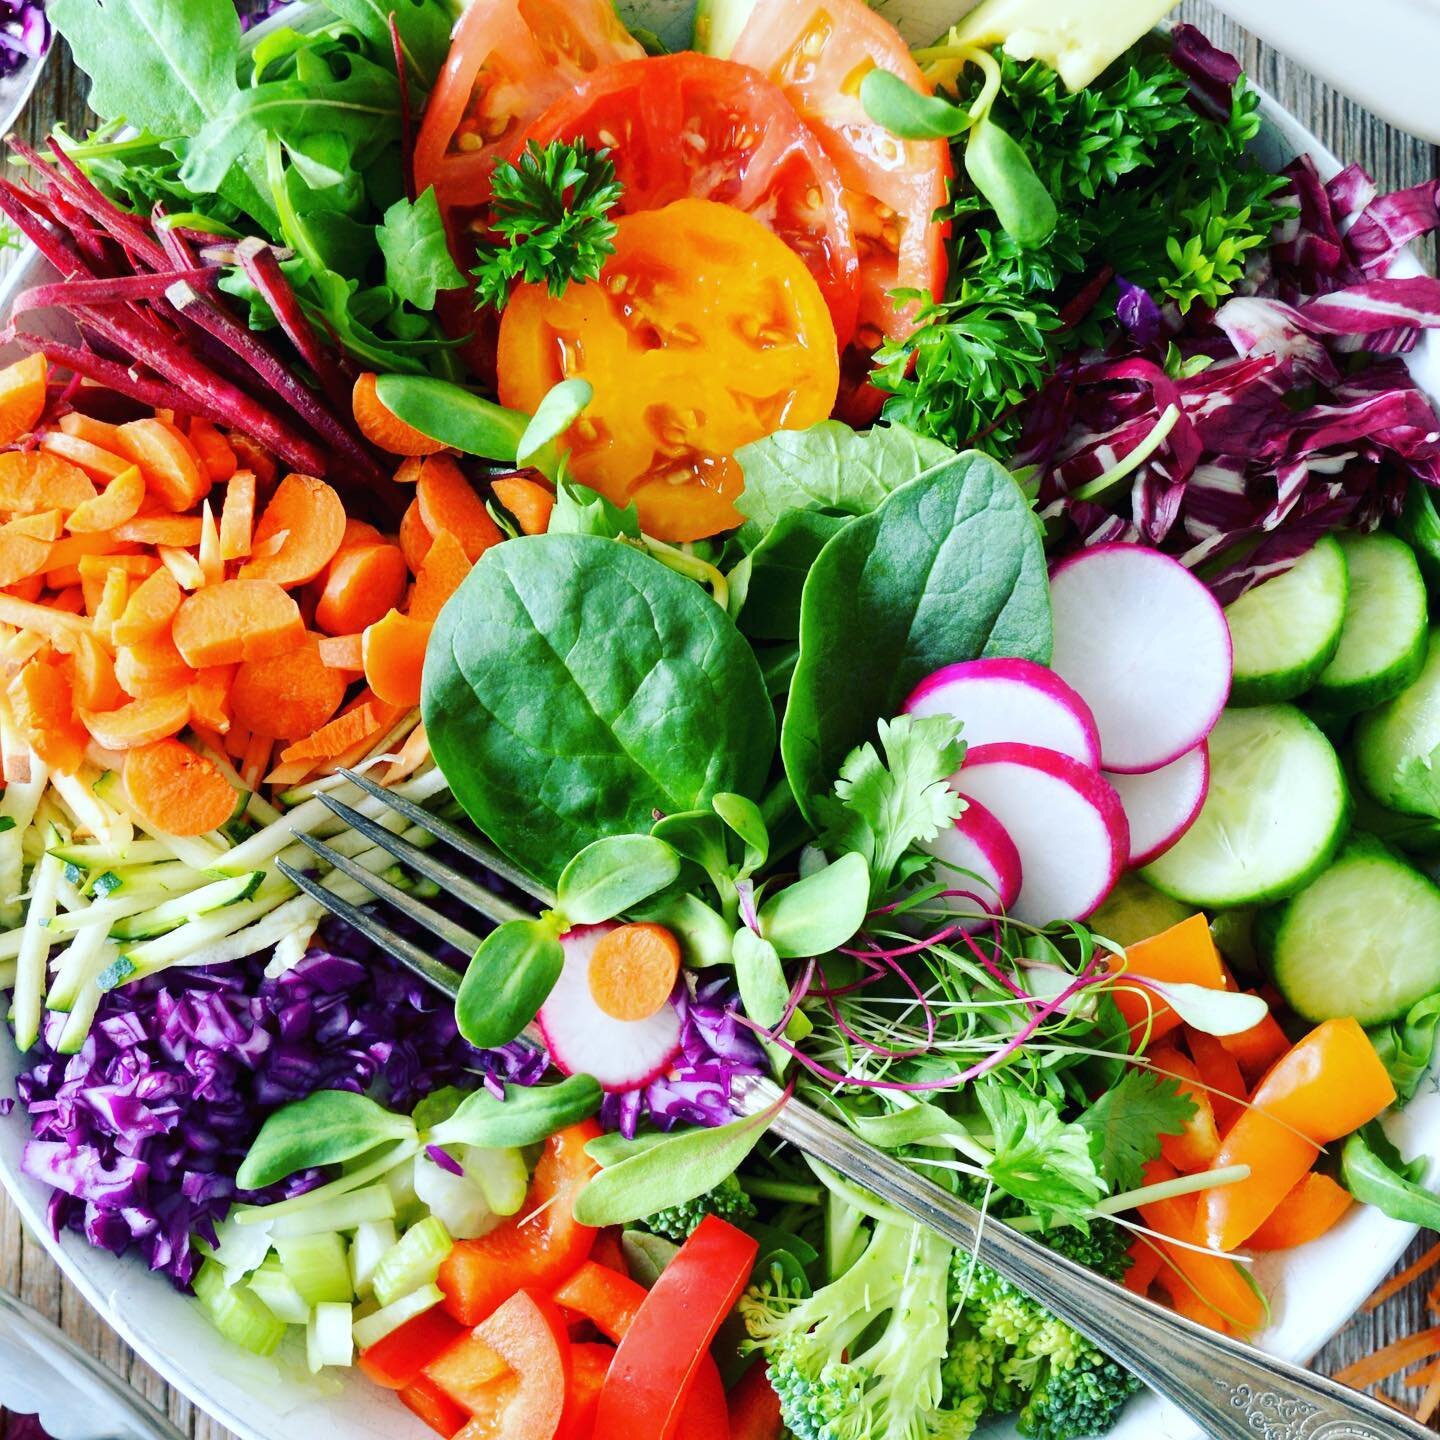 🌈 Eat the Rainbow! 🌈

Spring + Summer will bring a bounty of colorful plant goodness our way. Can&rsquo;t wait!

As a little experiment, I&rsquo;m planning on challenging myself to dial back on meat a bit + take in a daily spectrum of veggies to se